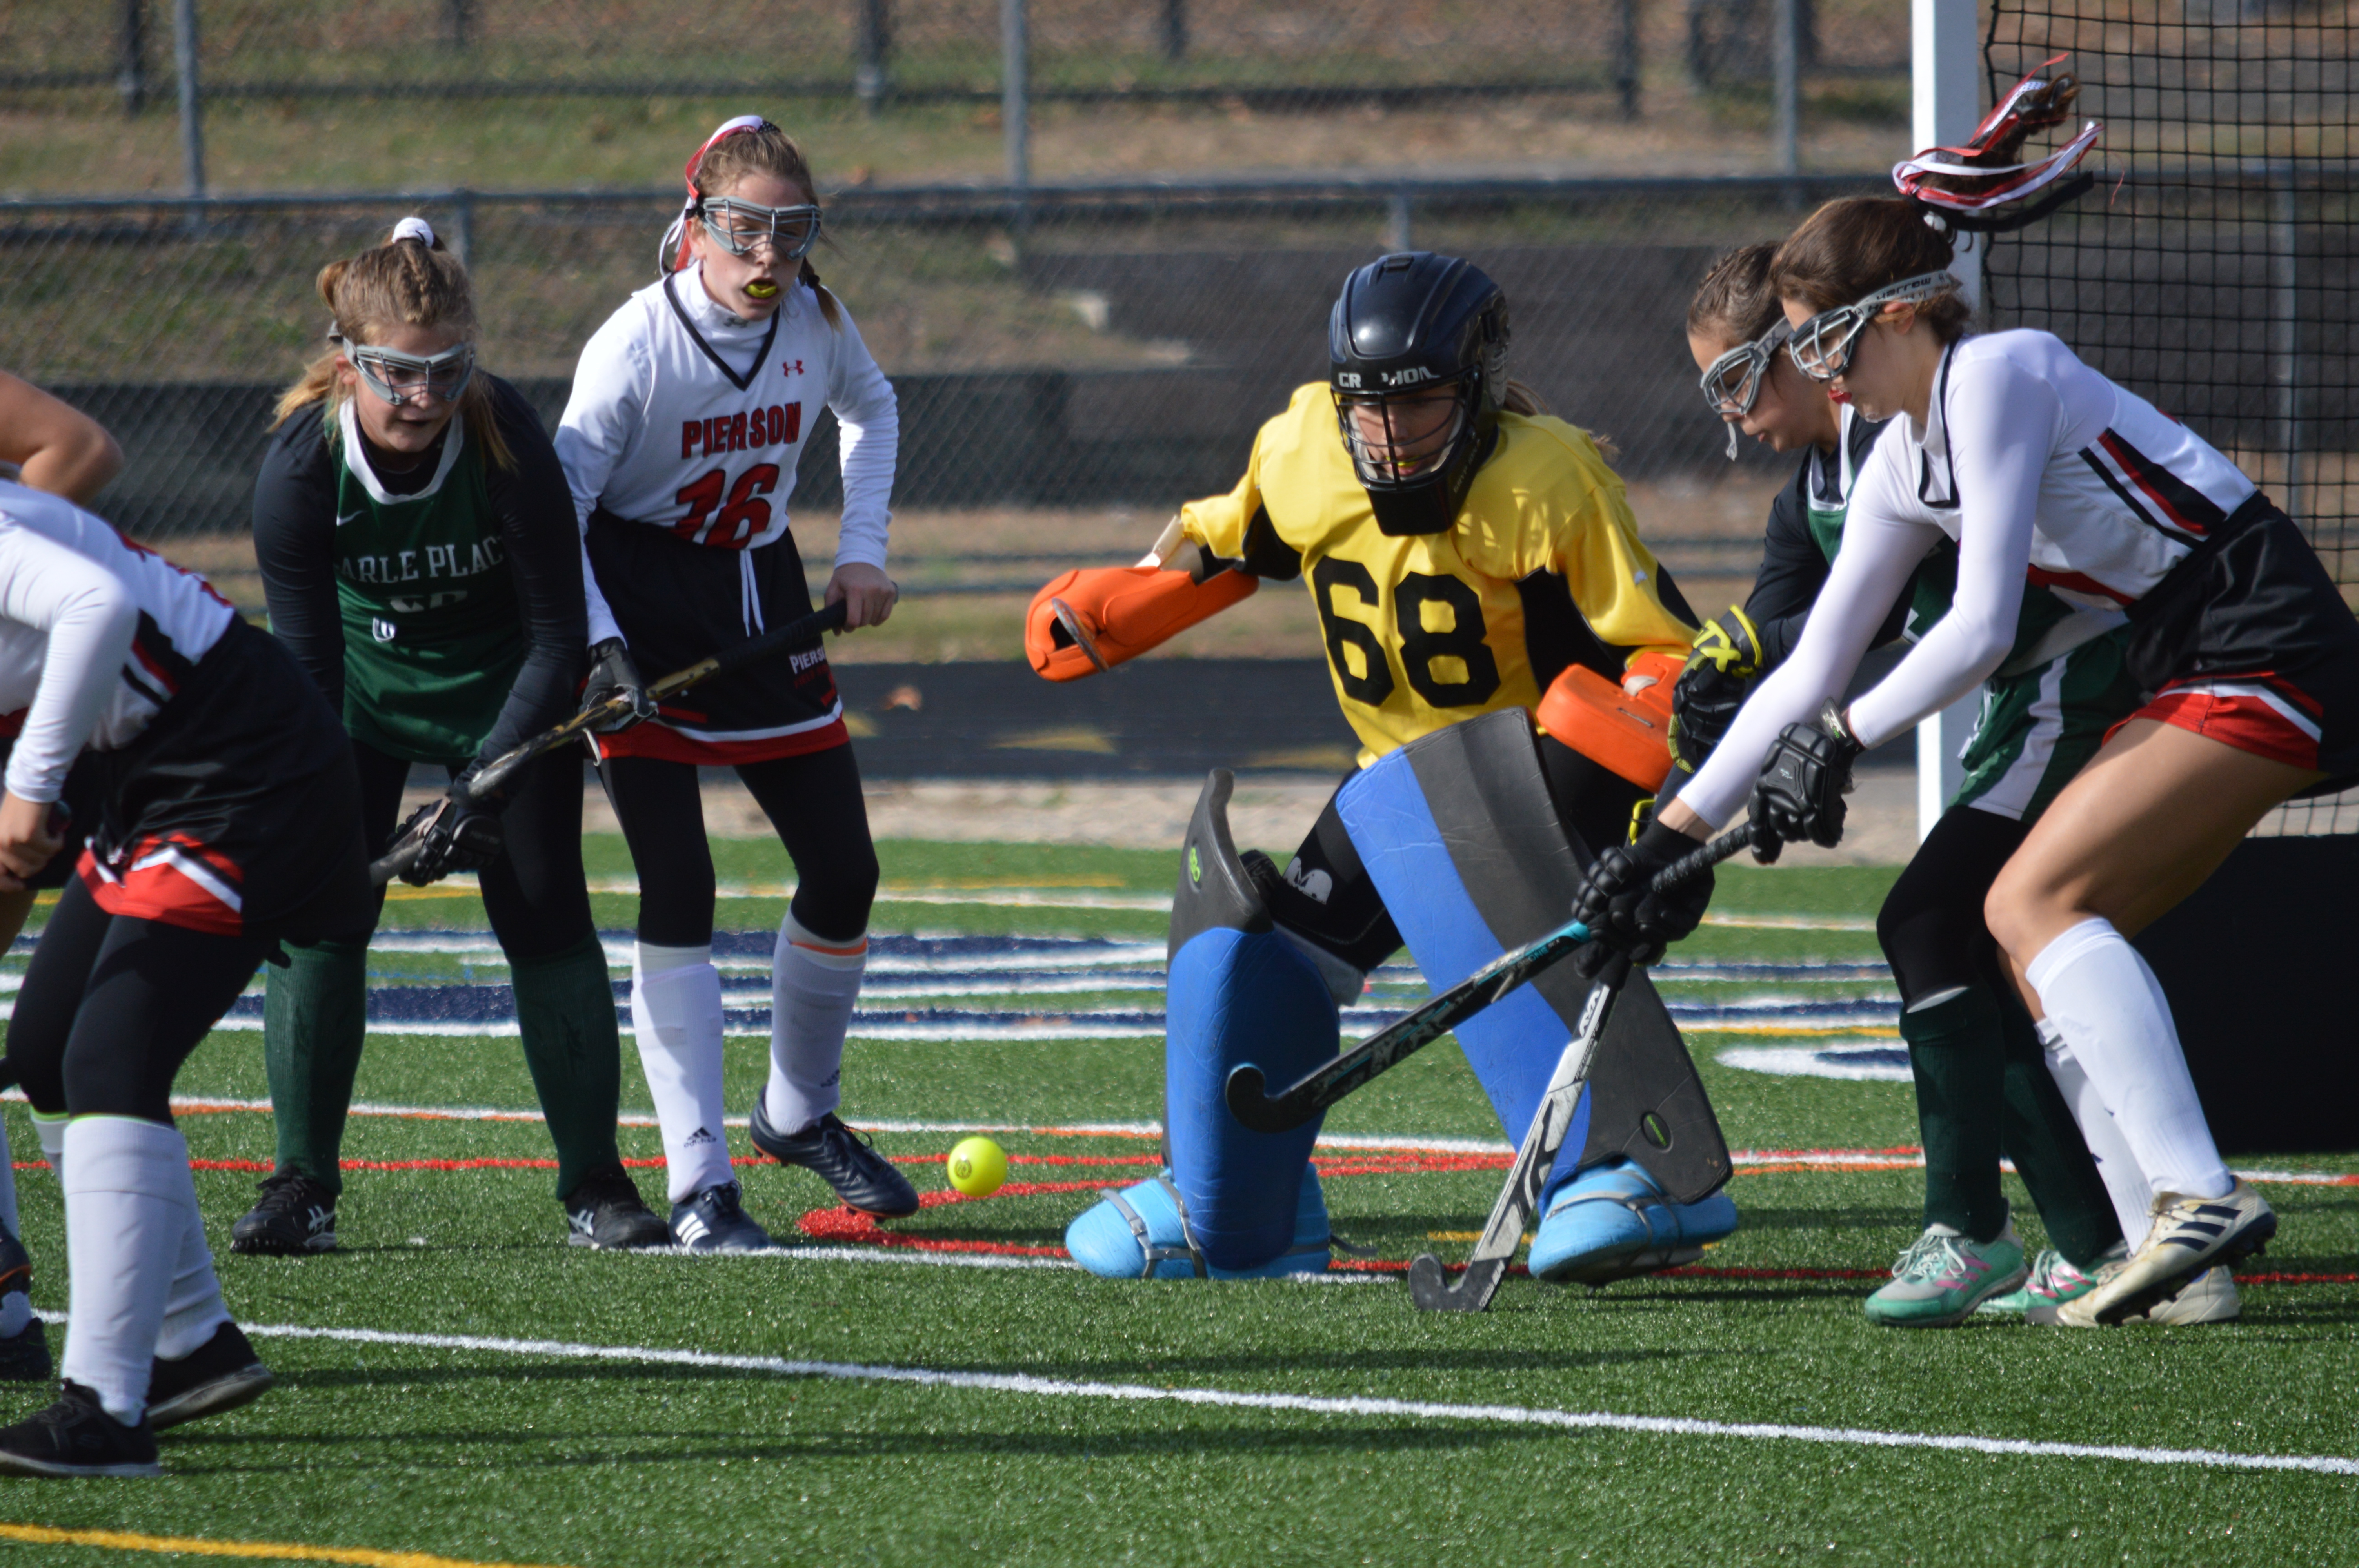 Pierson's freshman goalie, Maeve O'Donoghue, making one of her nine saves in a 1-0 loss to Carle Place on Saturday in the Long Island Class C Championship game at Centereach High School. 